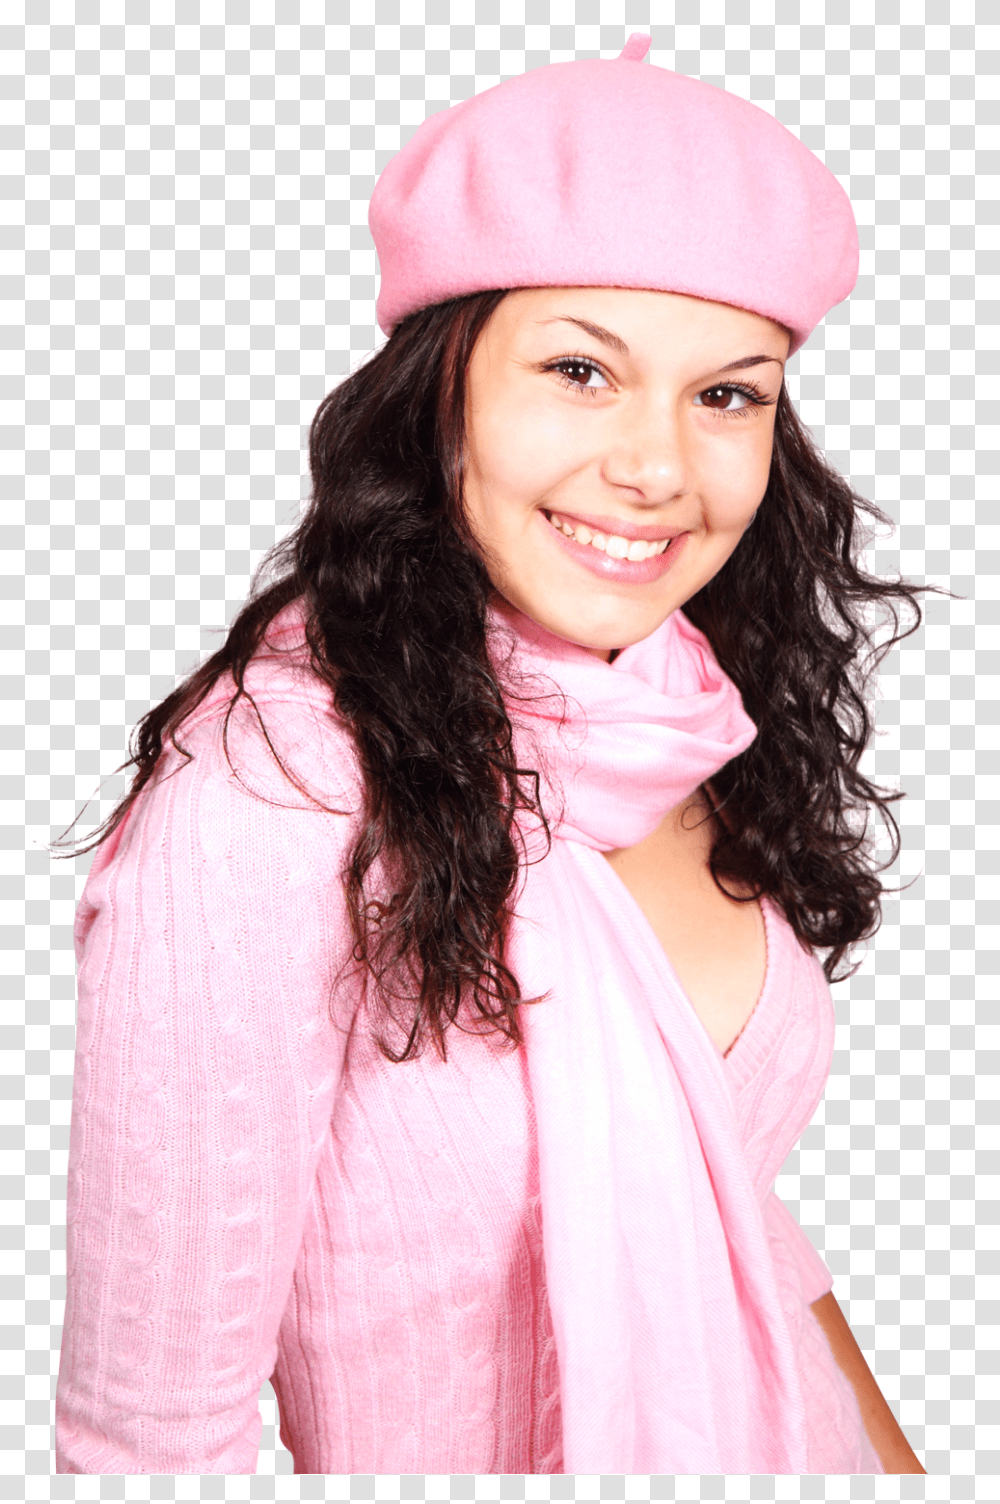 Beautiful Girl In Pink Dress Image Portable Network Graphics, Clothing, Person, Sleeve, Hat Transparent Png